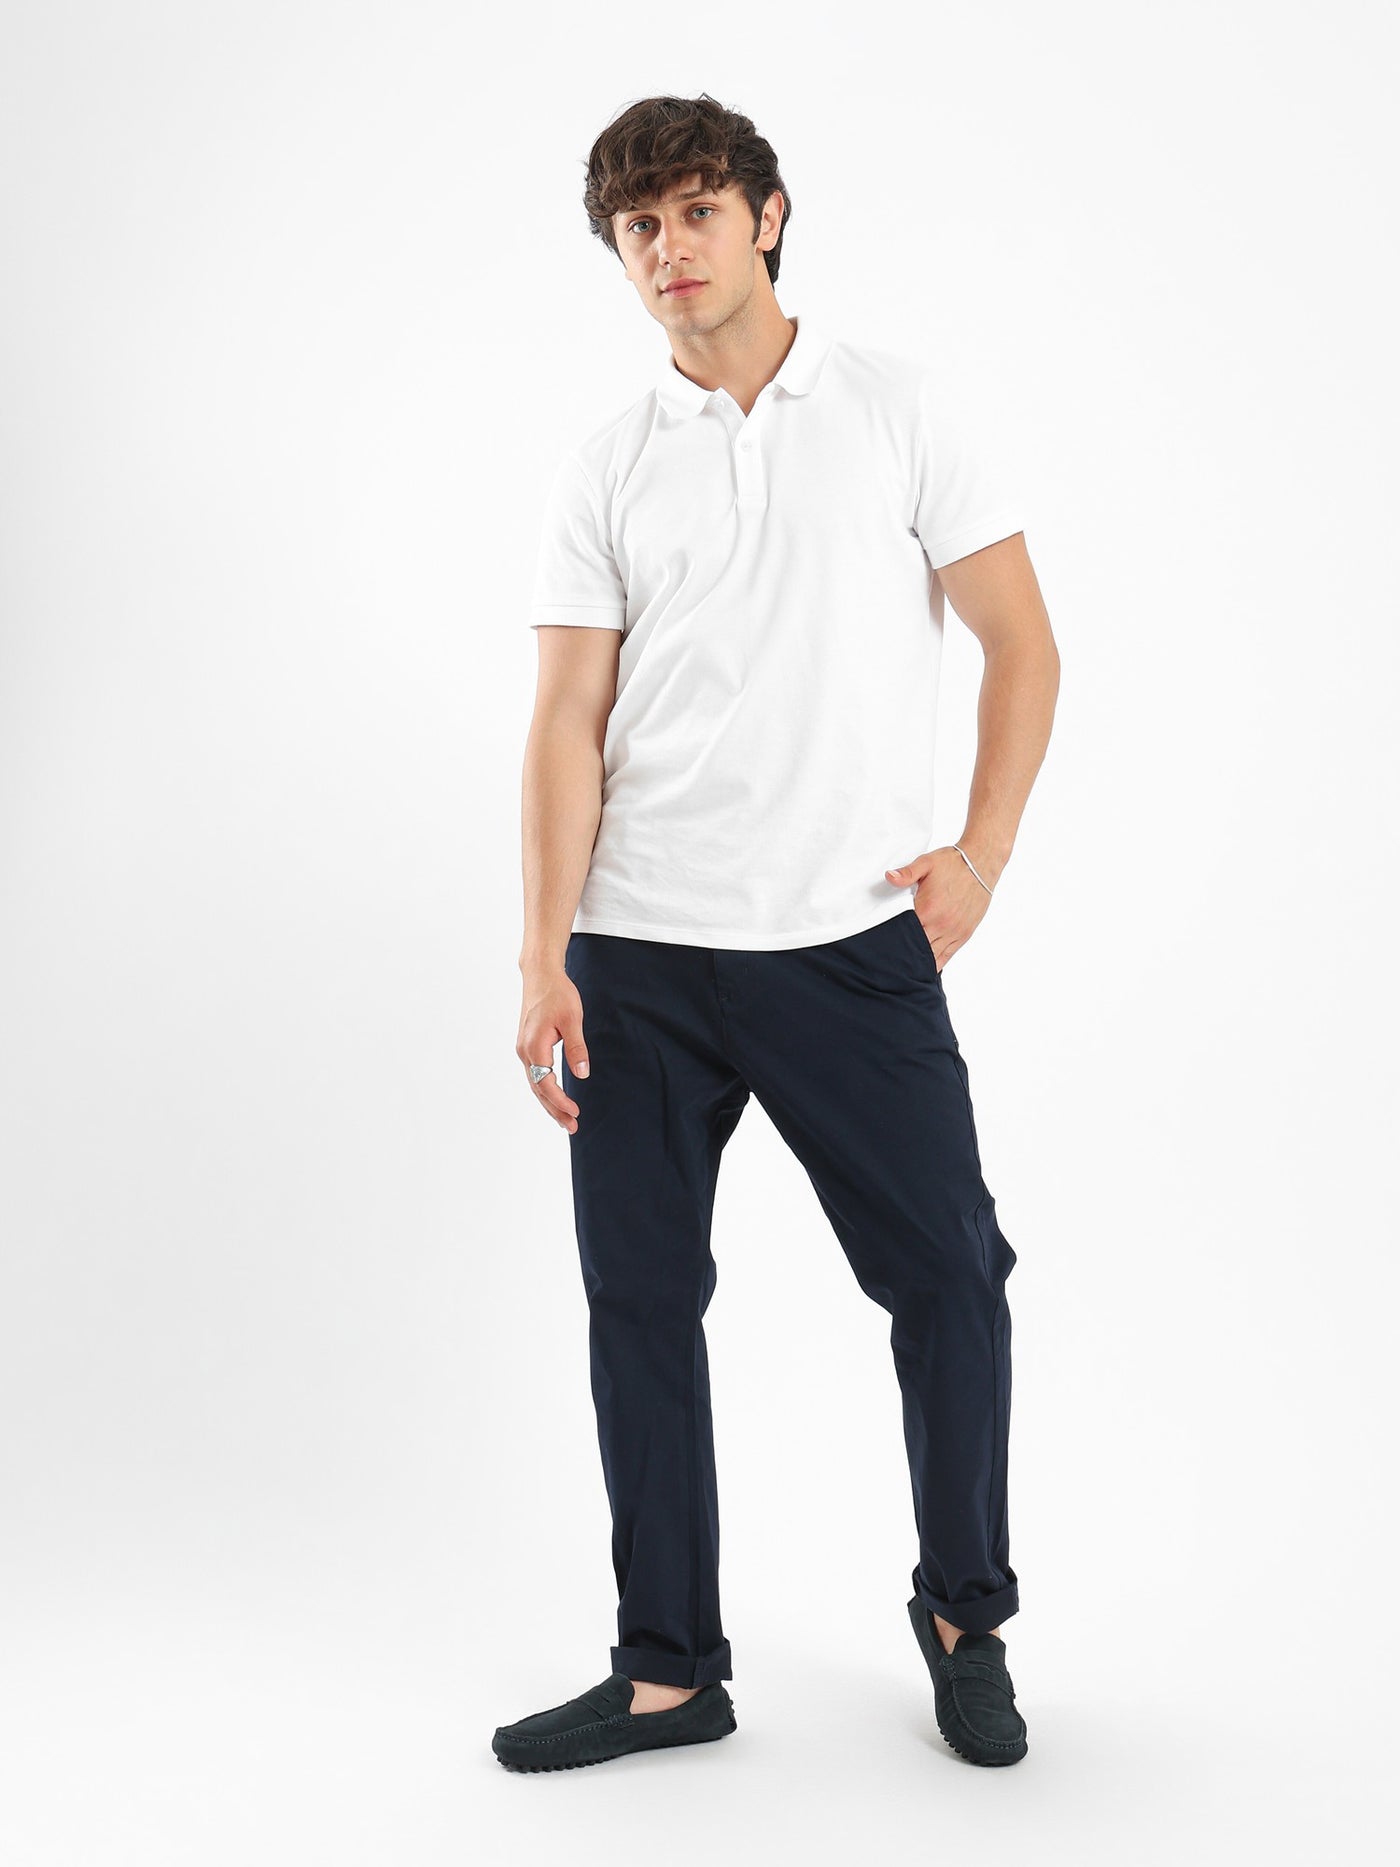 Pants - Solid - With Pockets